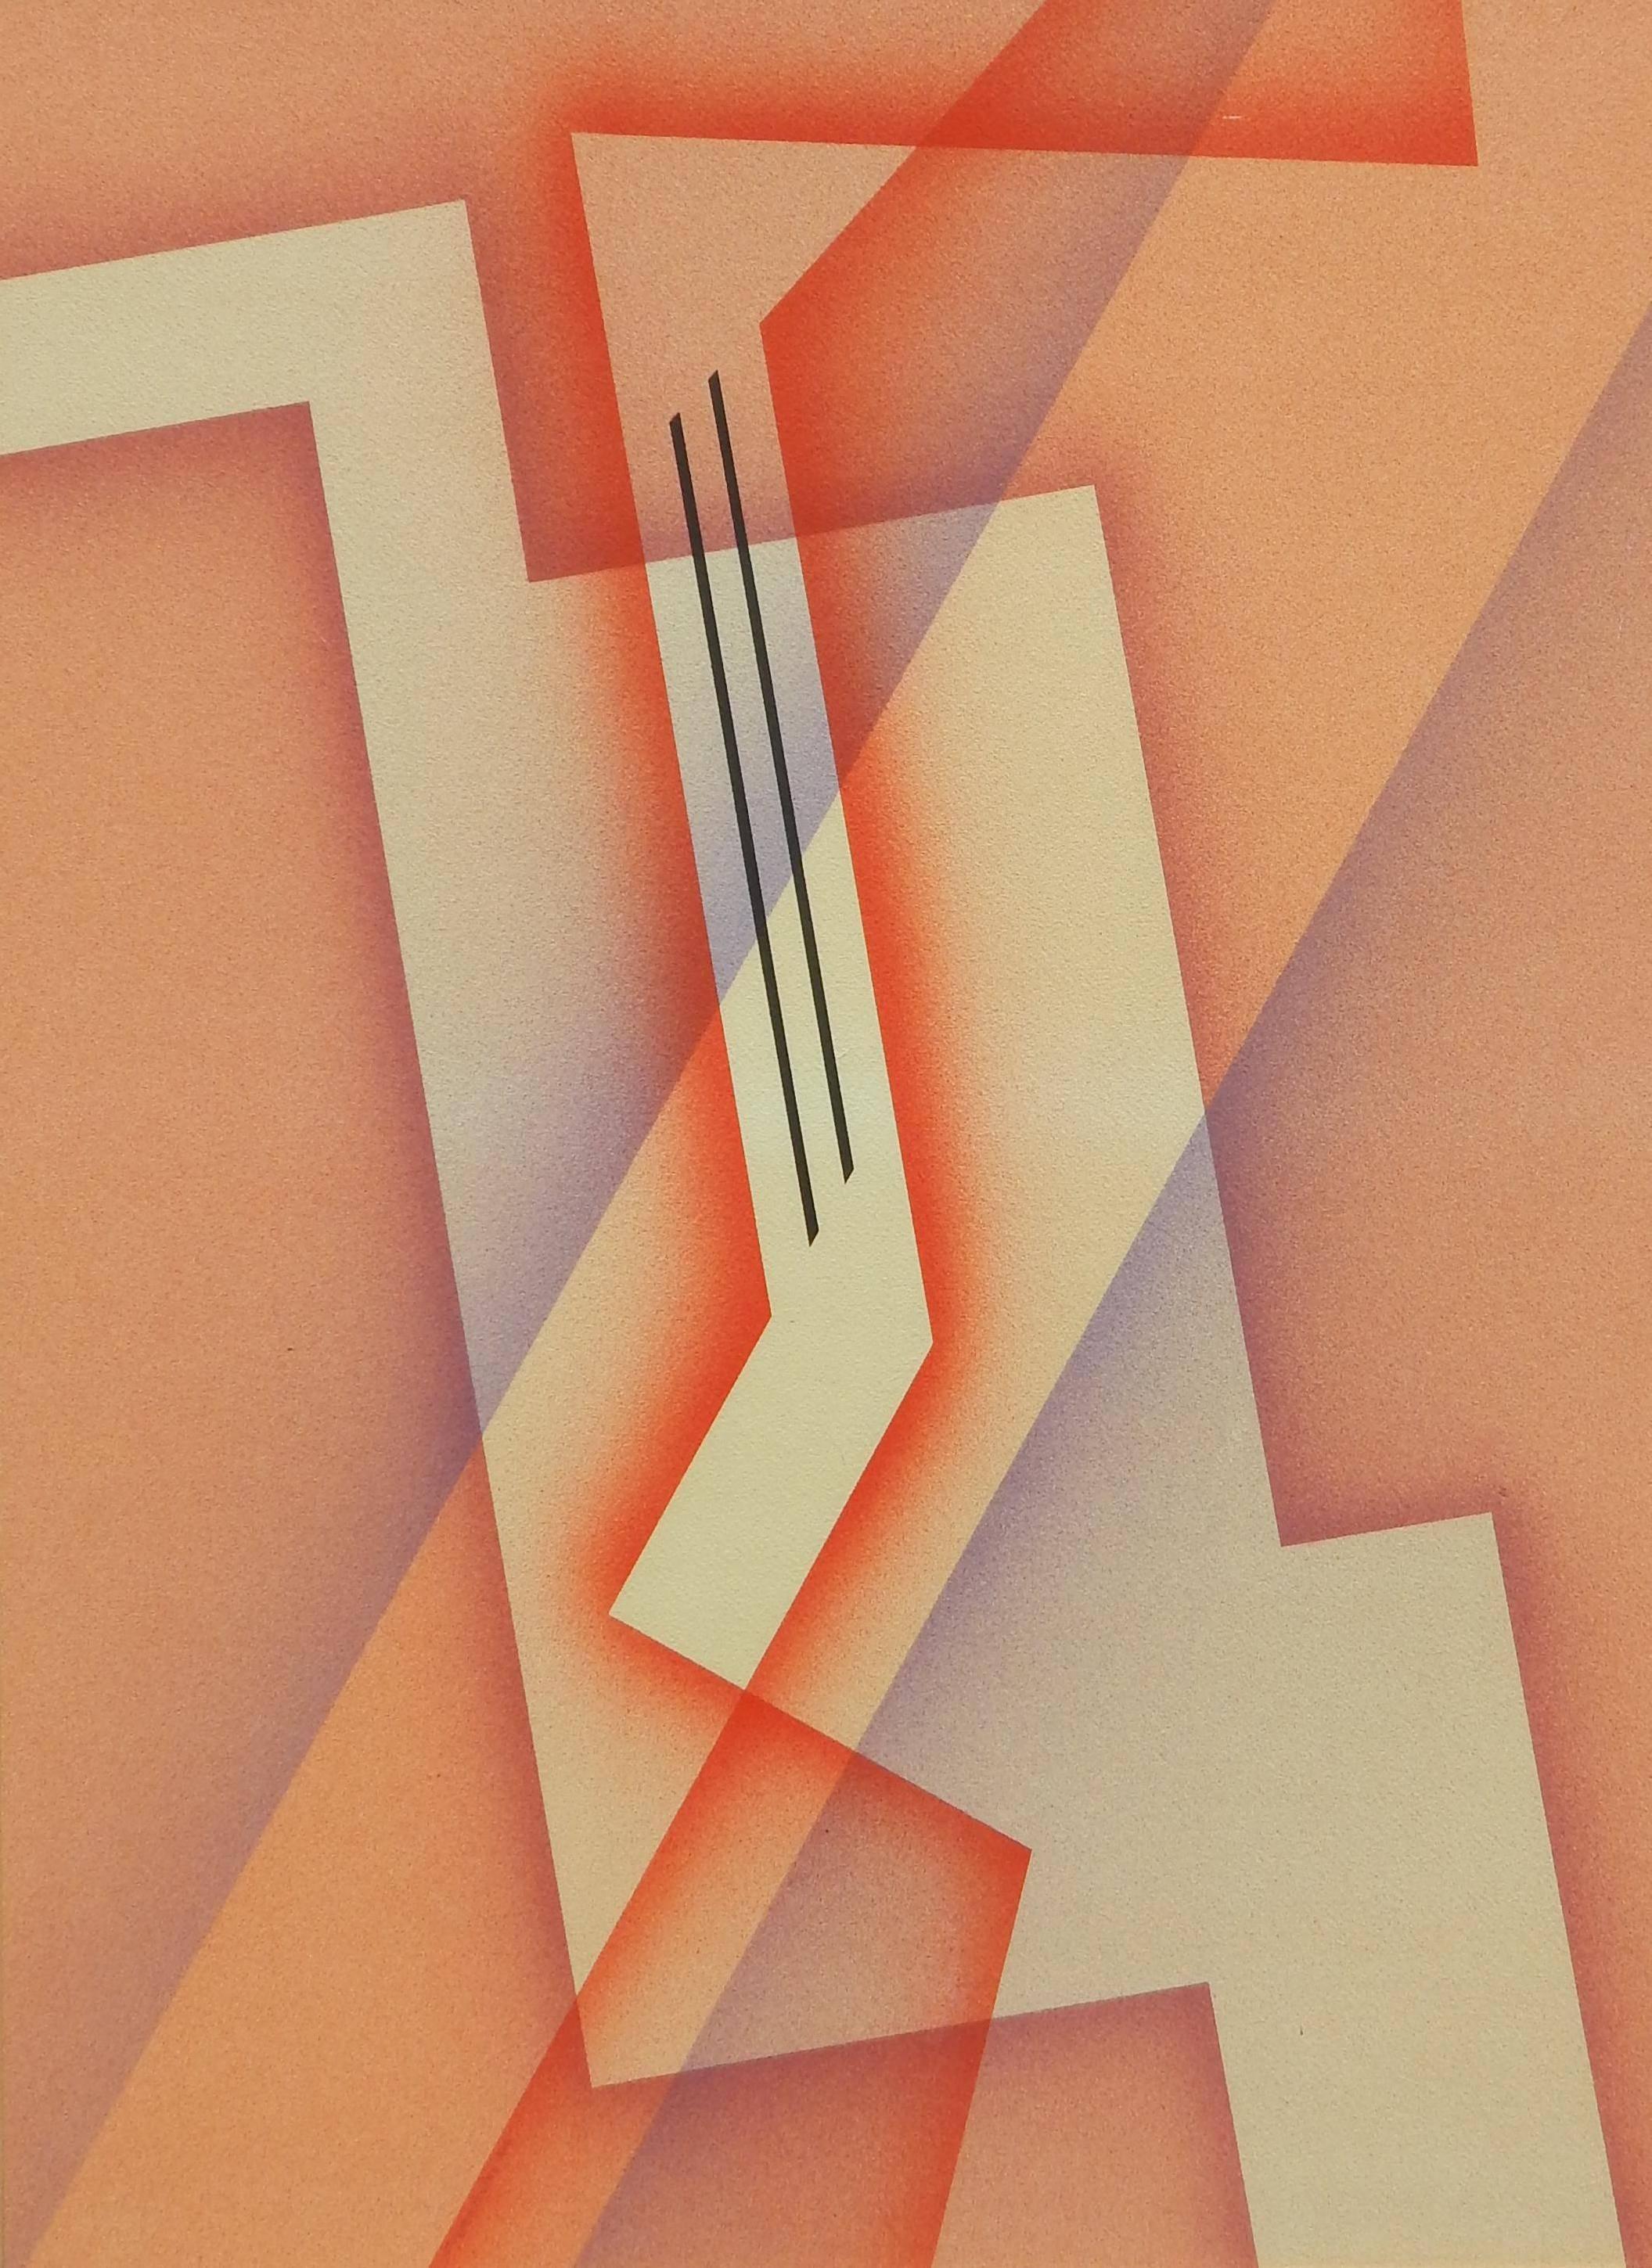 Great abstract by Transcendental painter Raymond Jonson (1891-1982)
Titled: “Red Rhythm”.
Tempera, 1944.
Image measures: 30